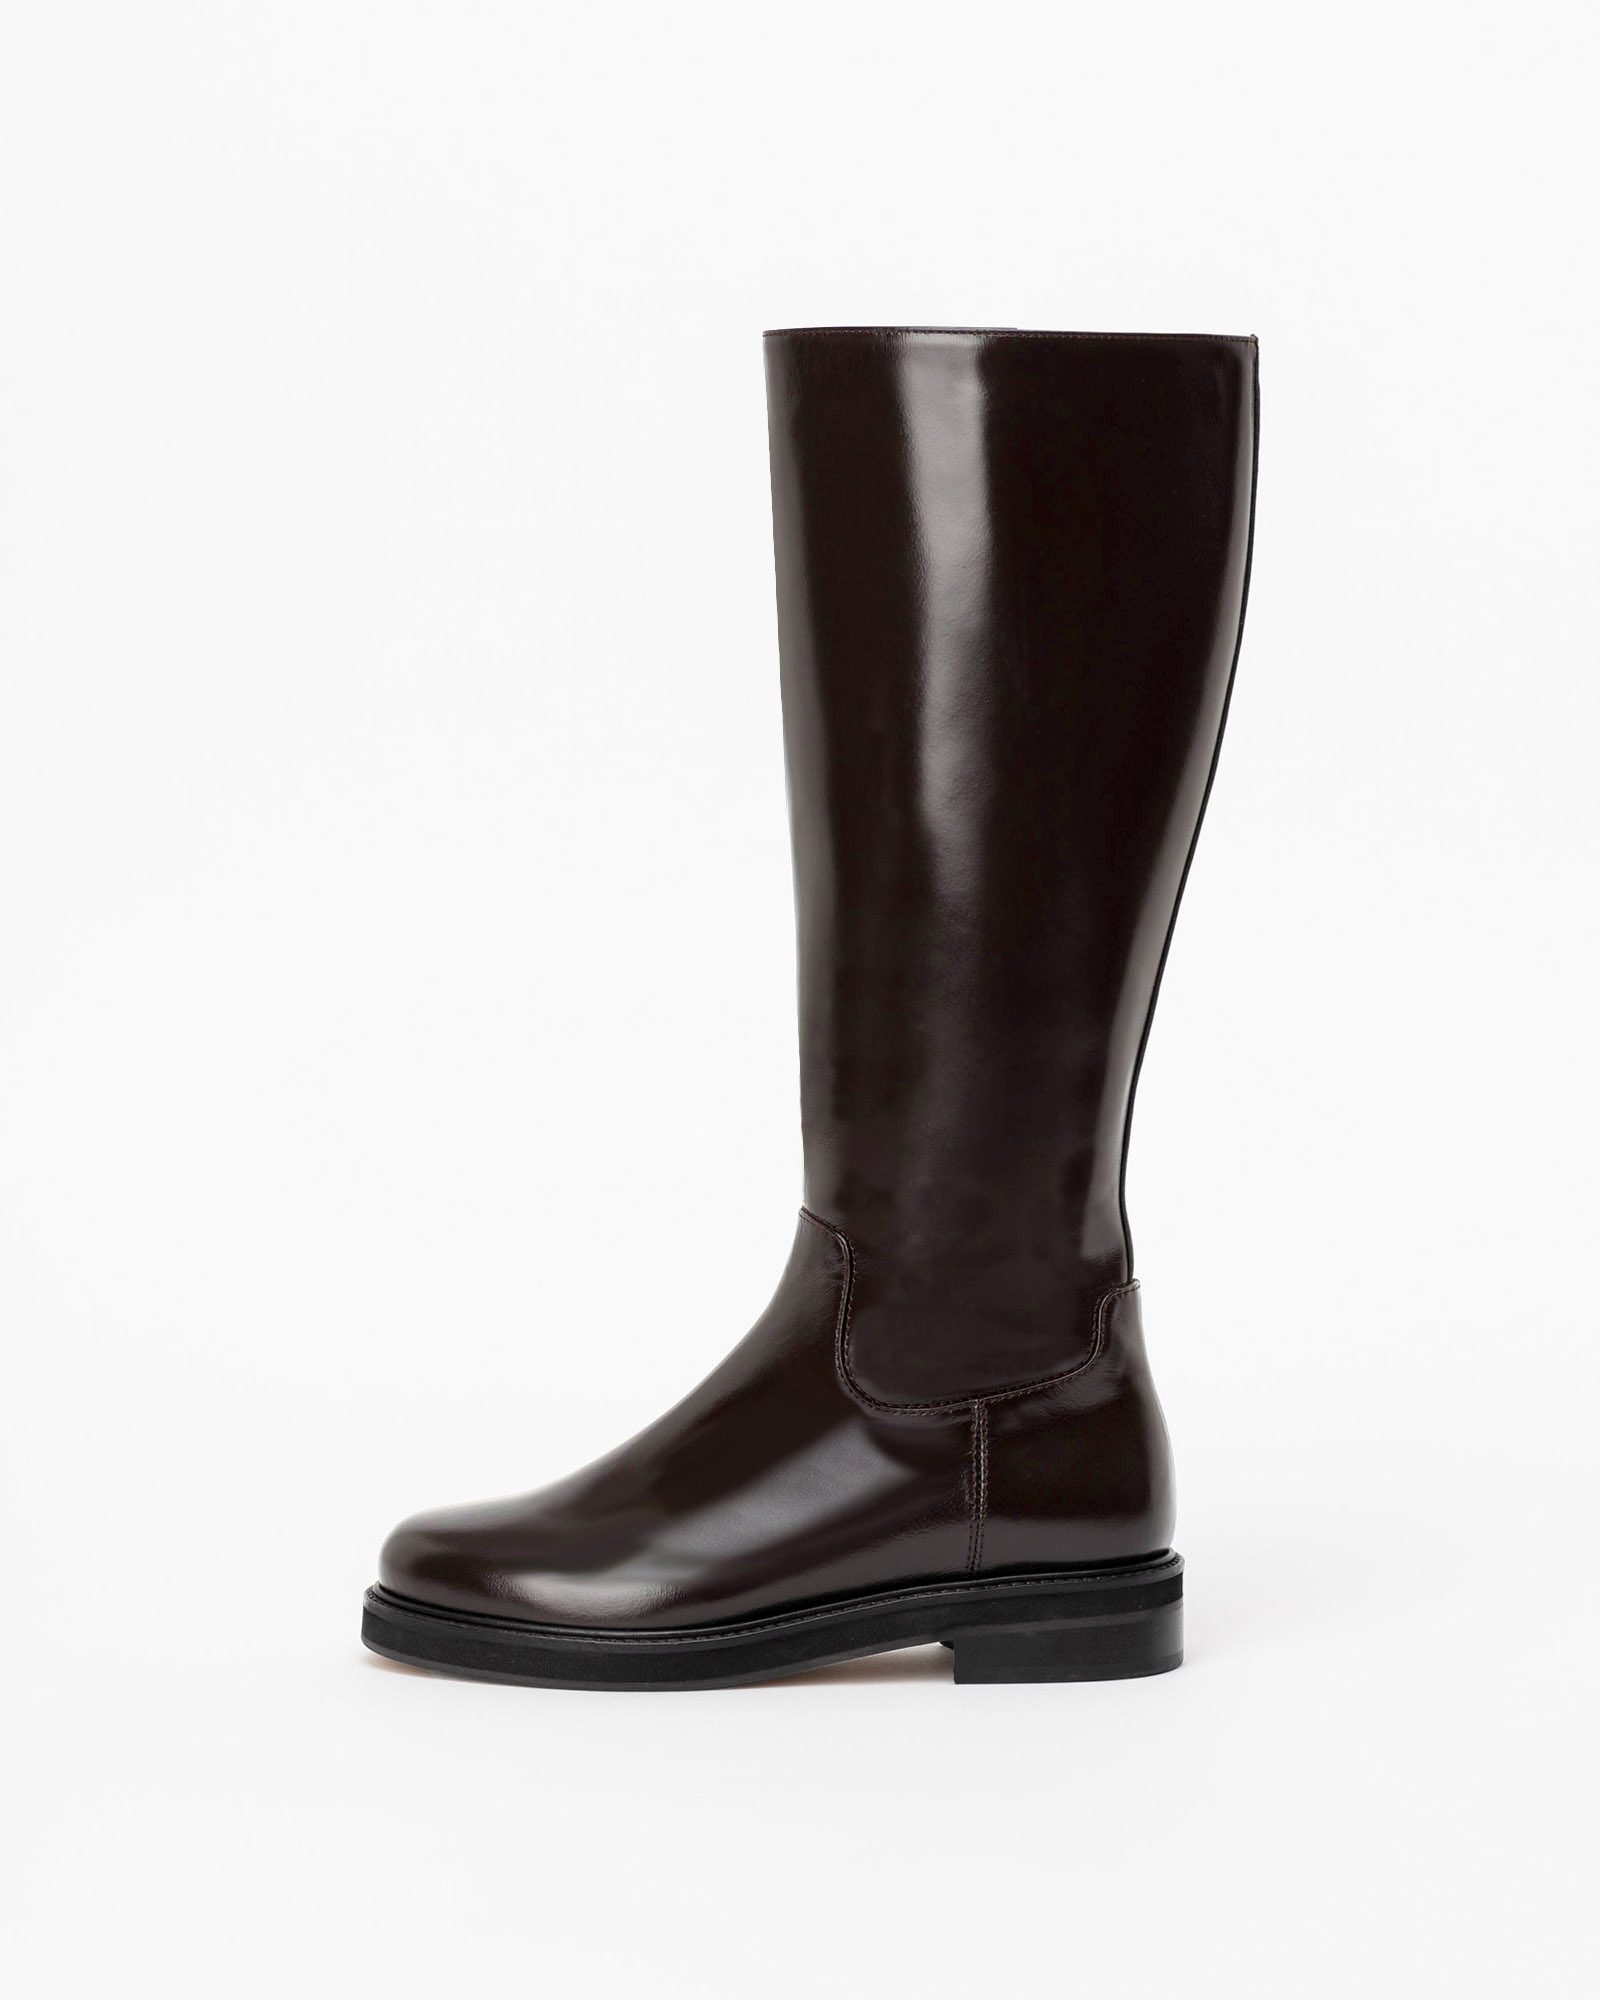 Fairview Riding Boots